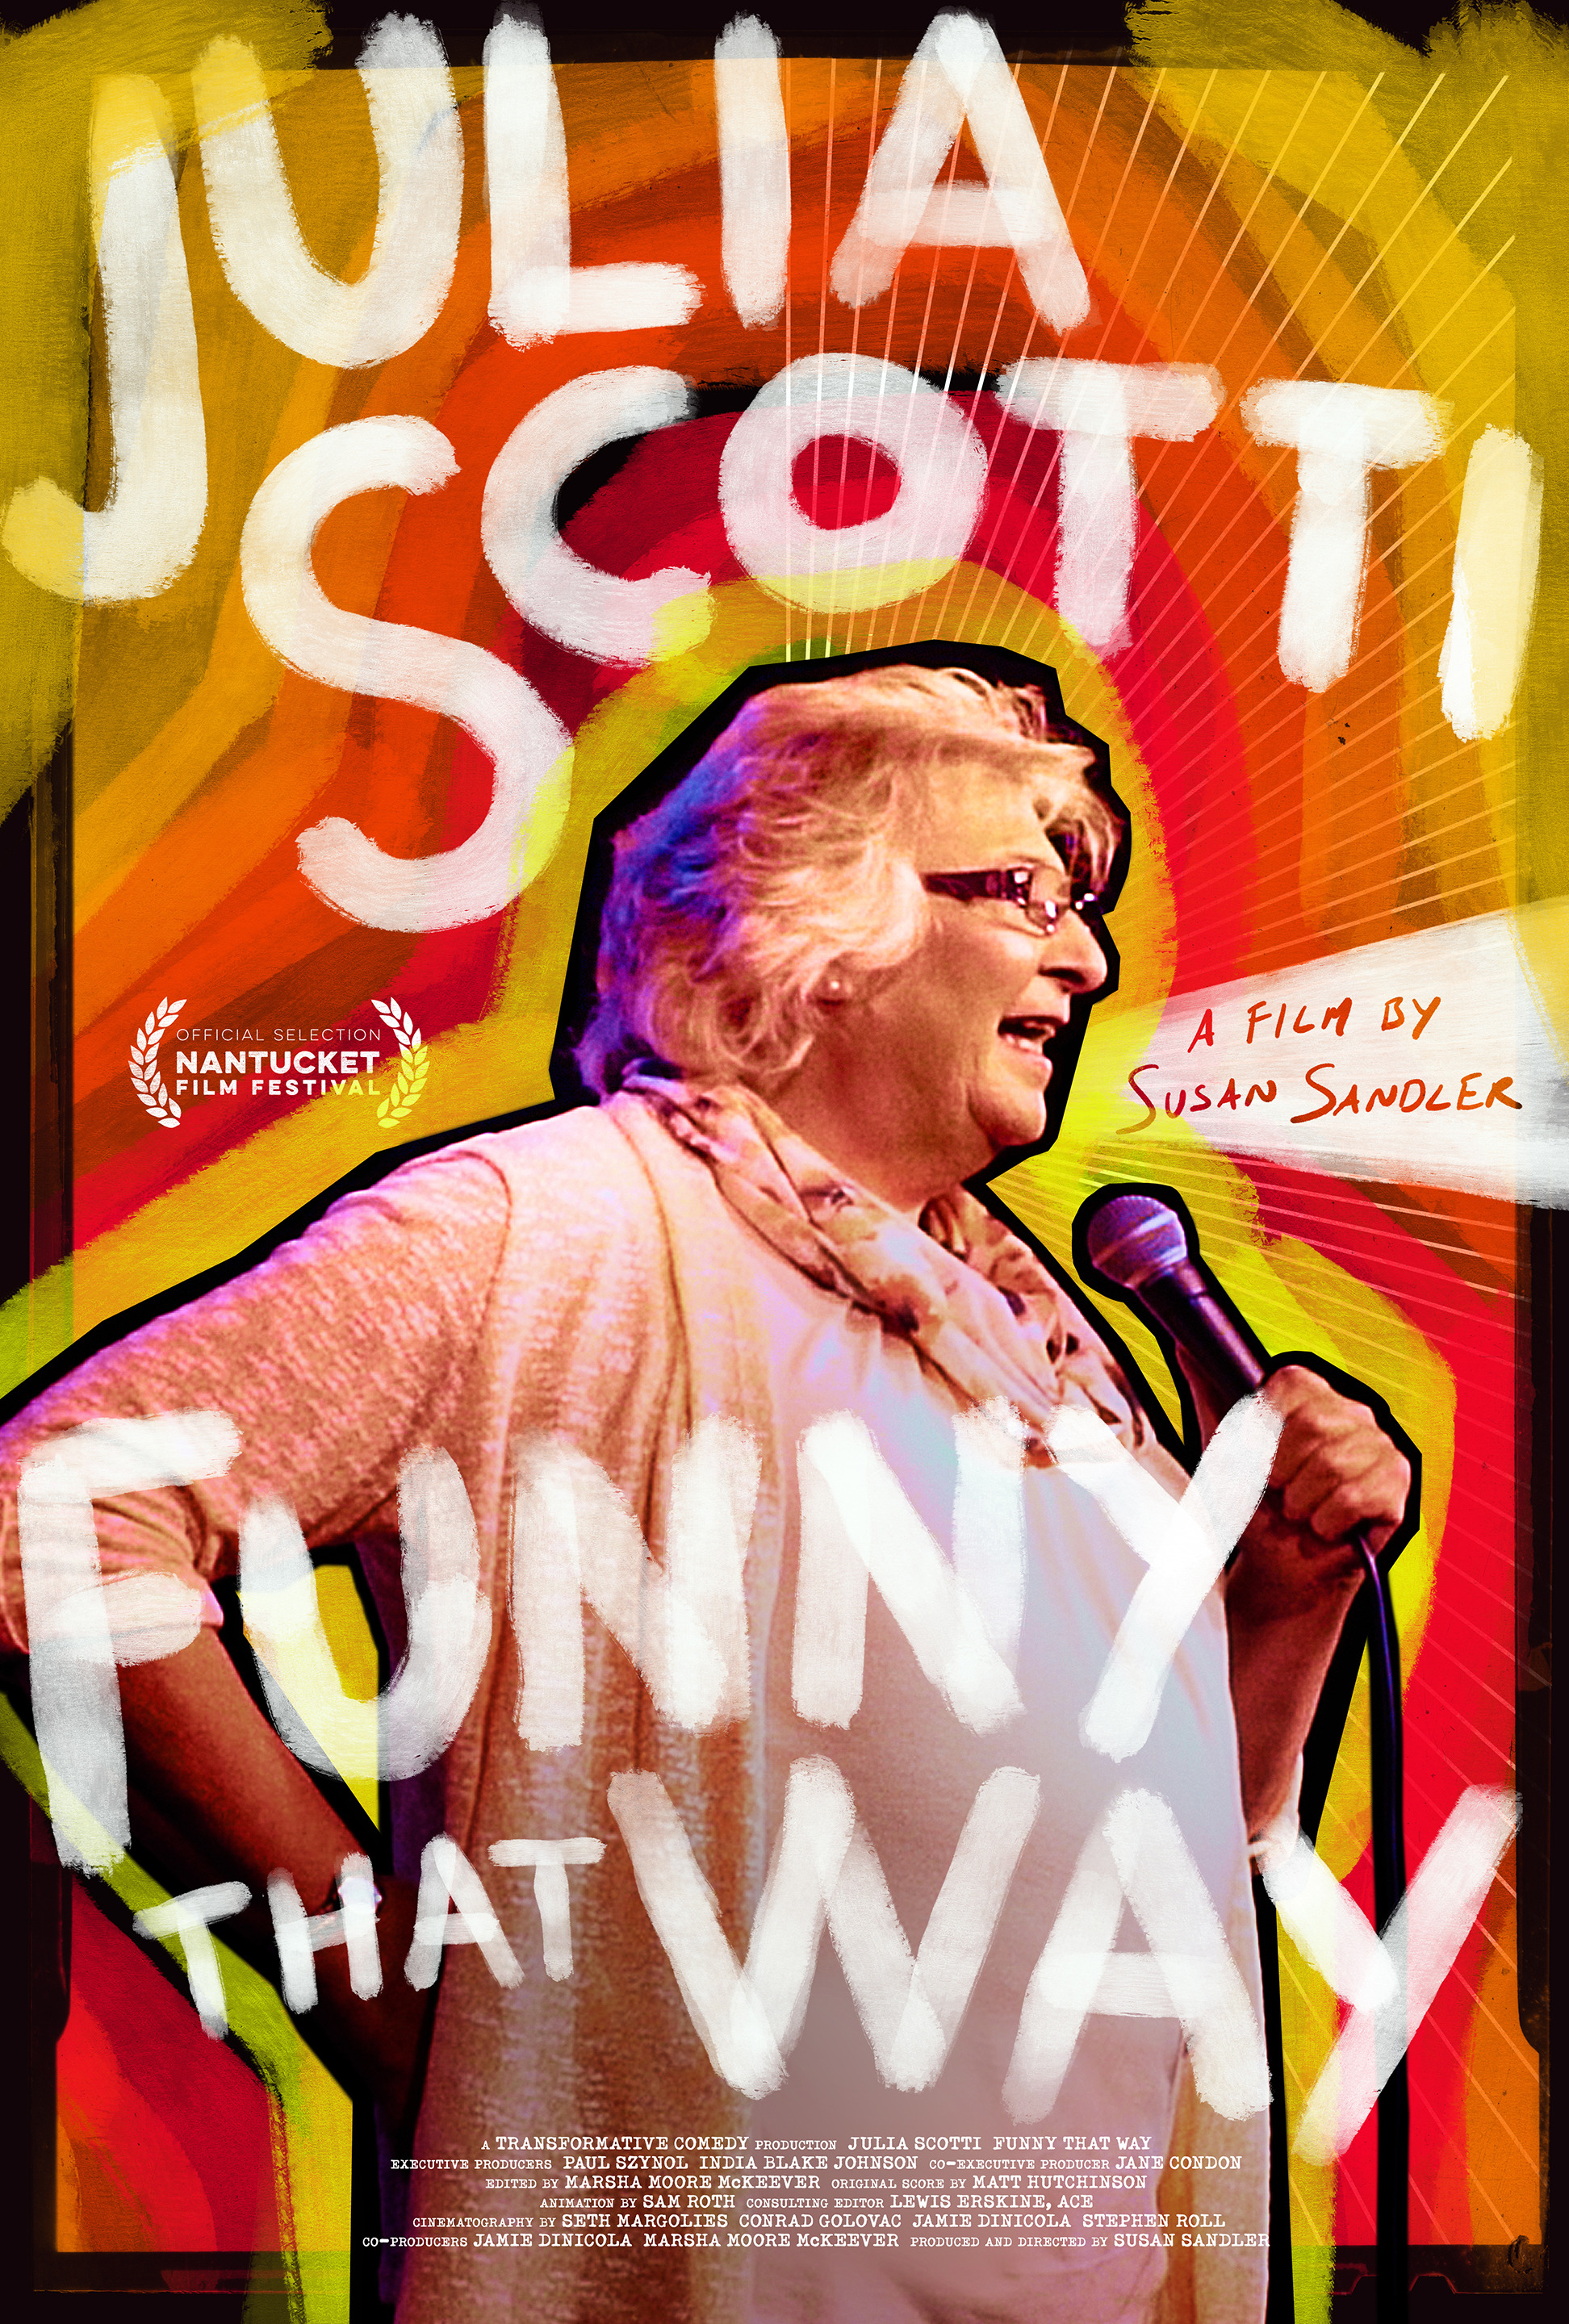 Mega Sized Movie Poster Image for Julia Scotti: Funny That Way 